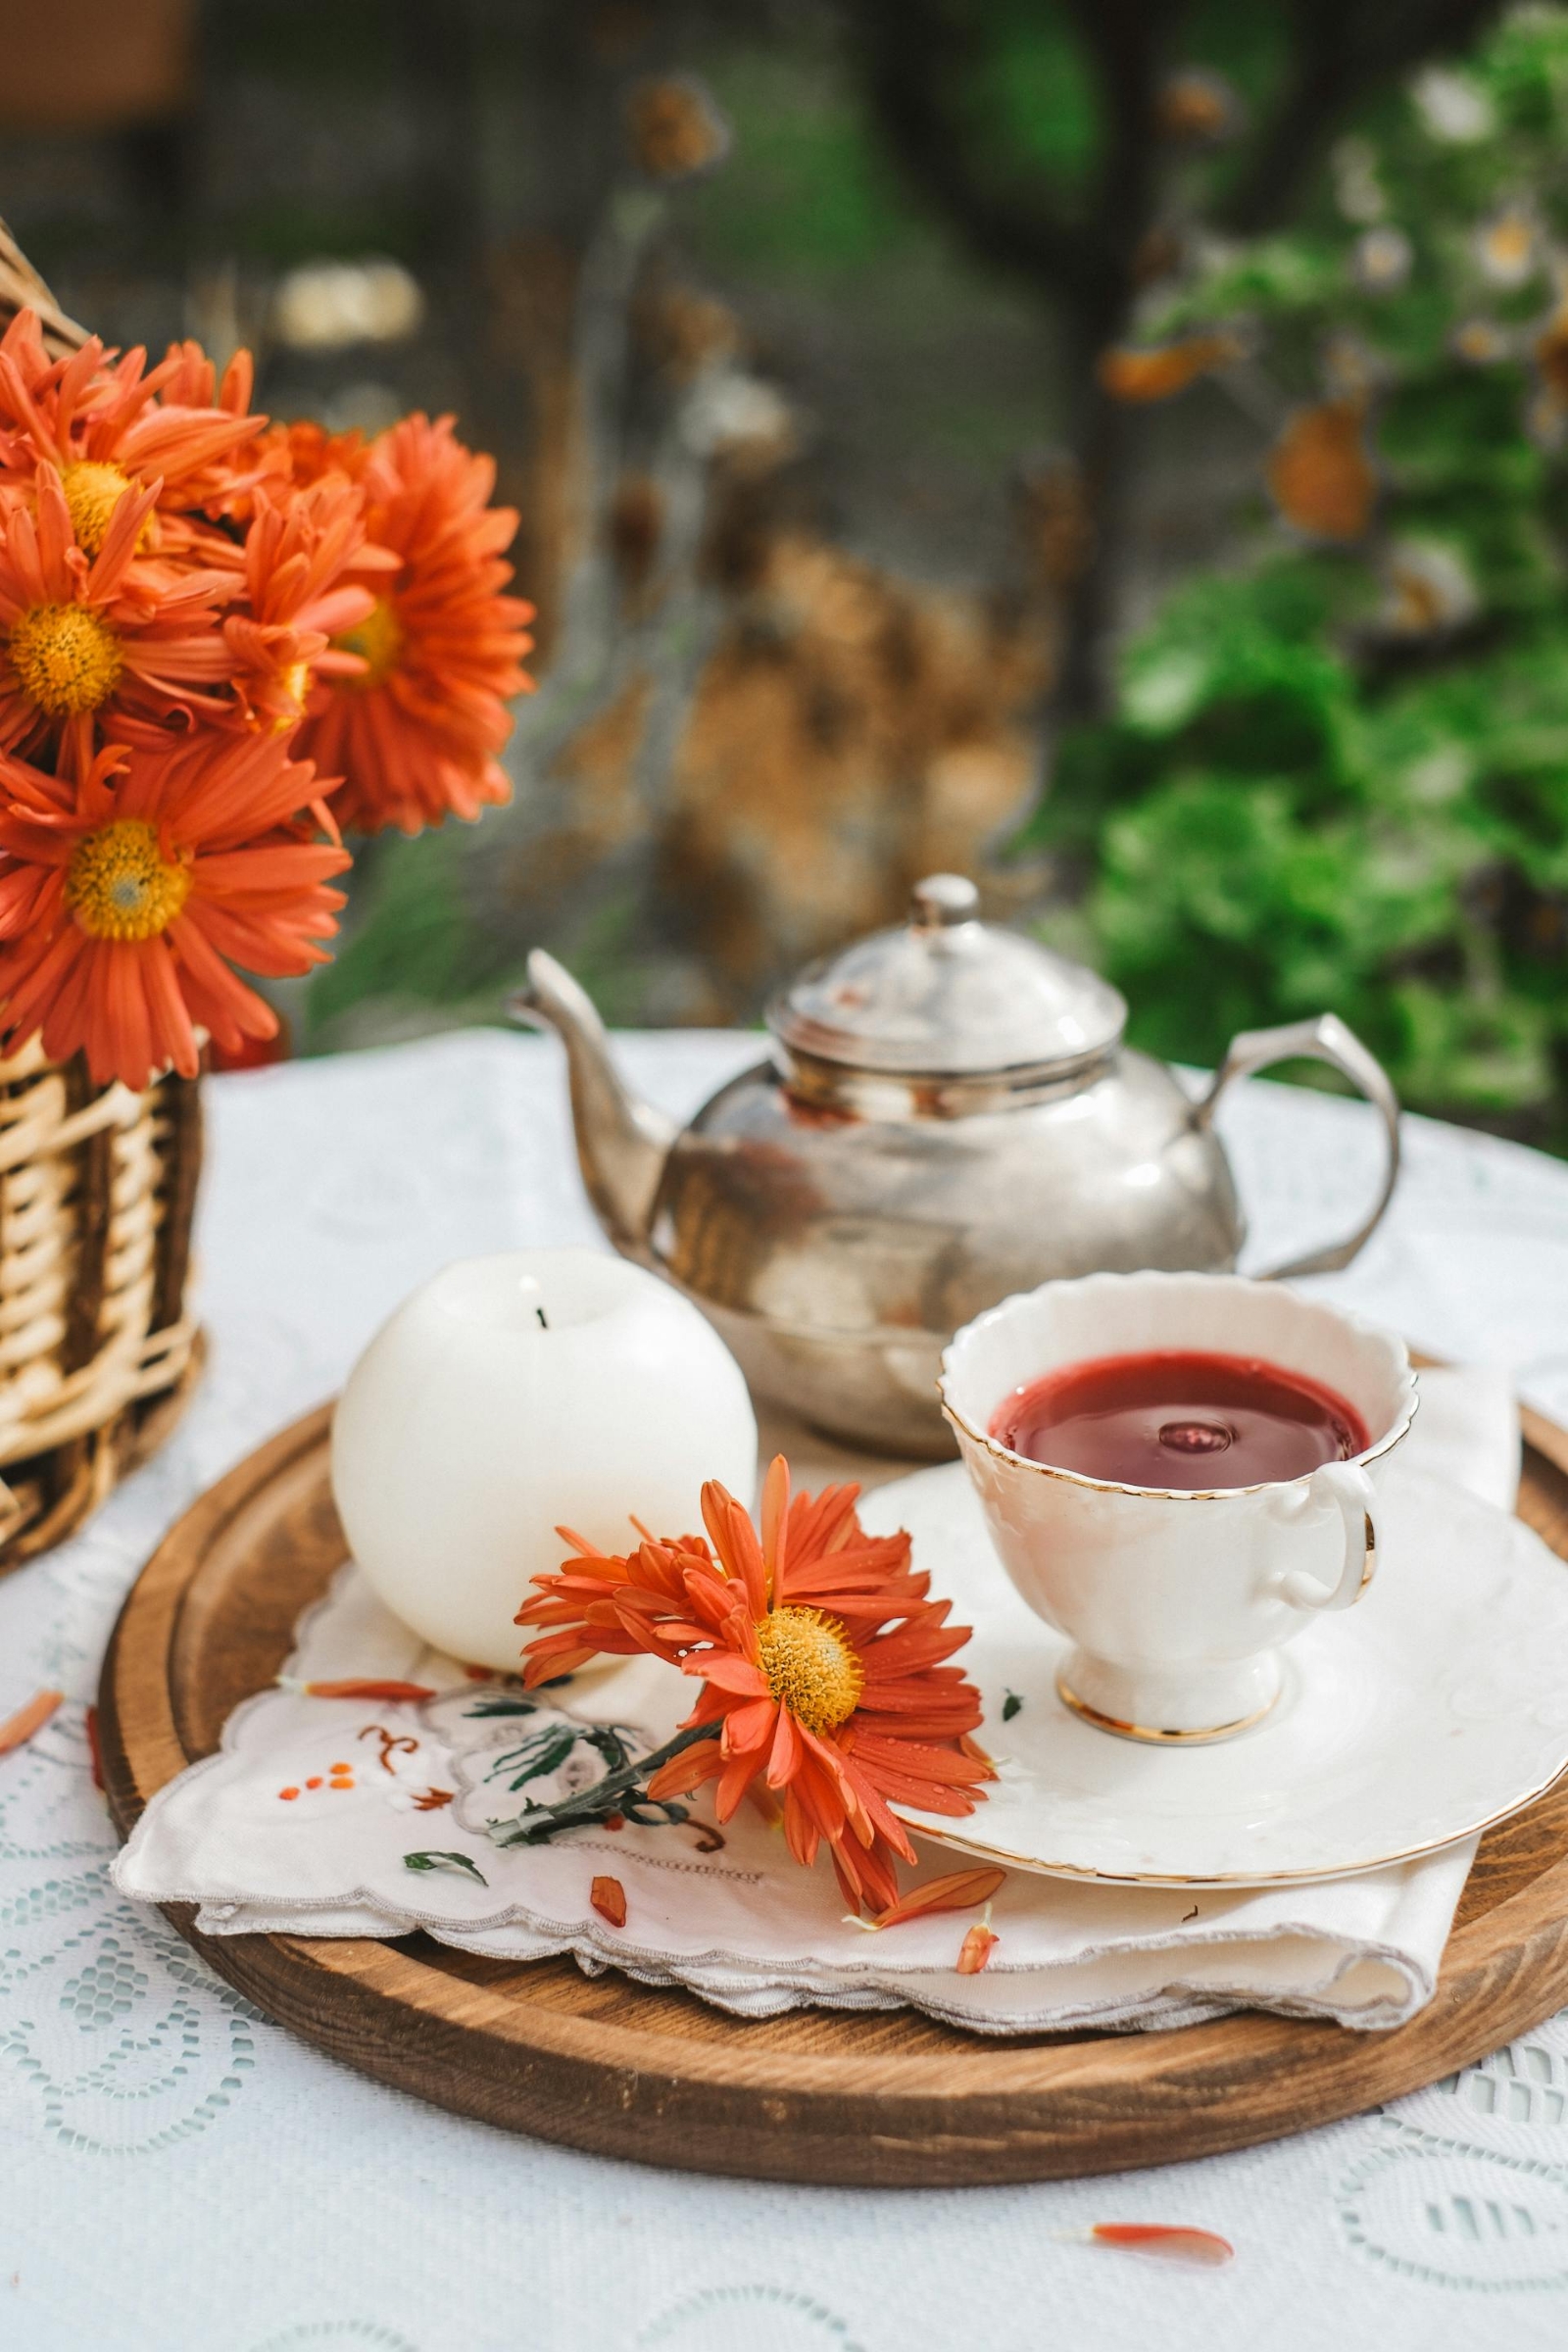 A Tea Garden Is The Hottest Trend & We’re Here For It!